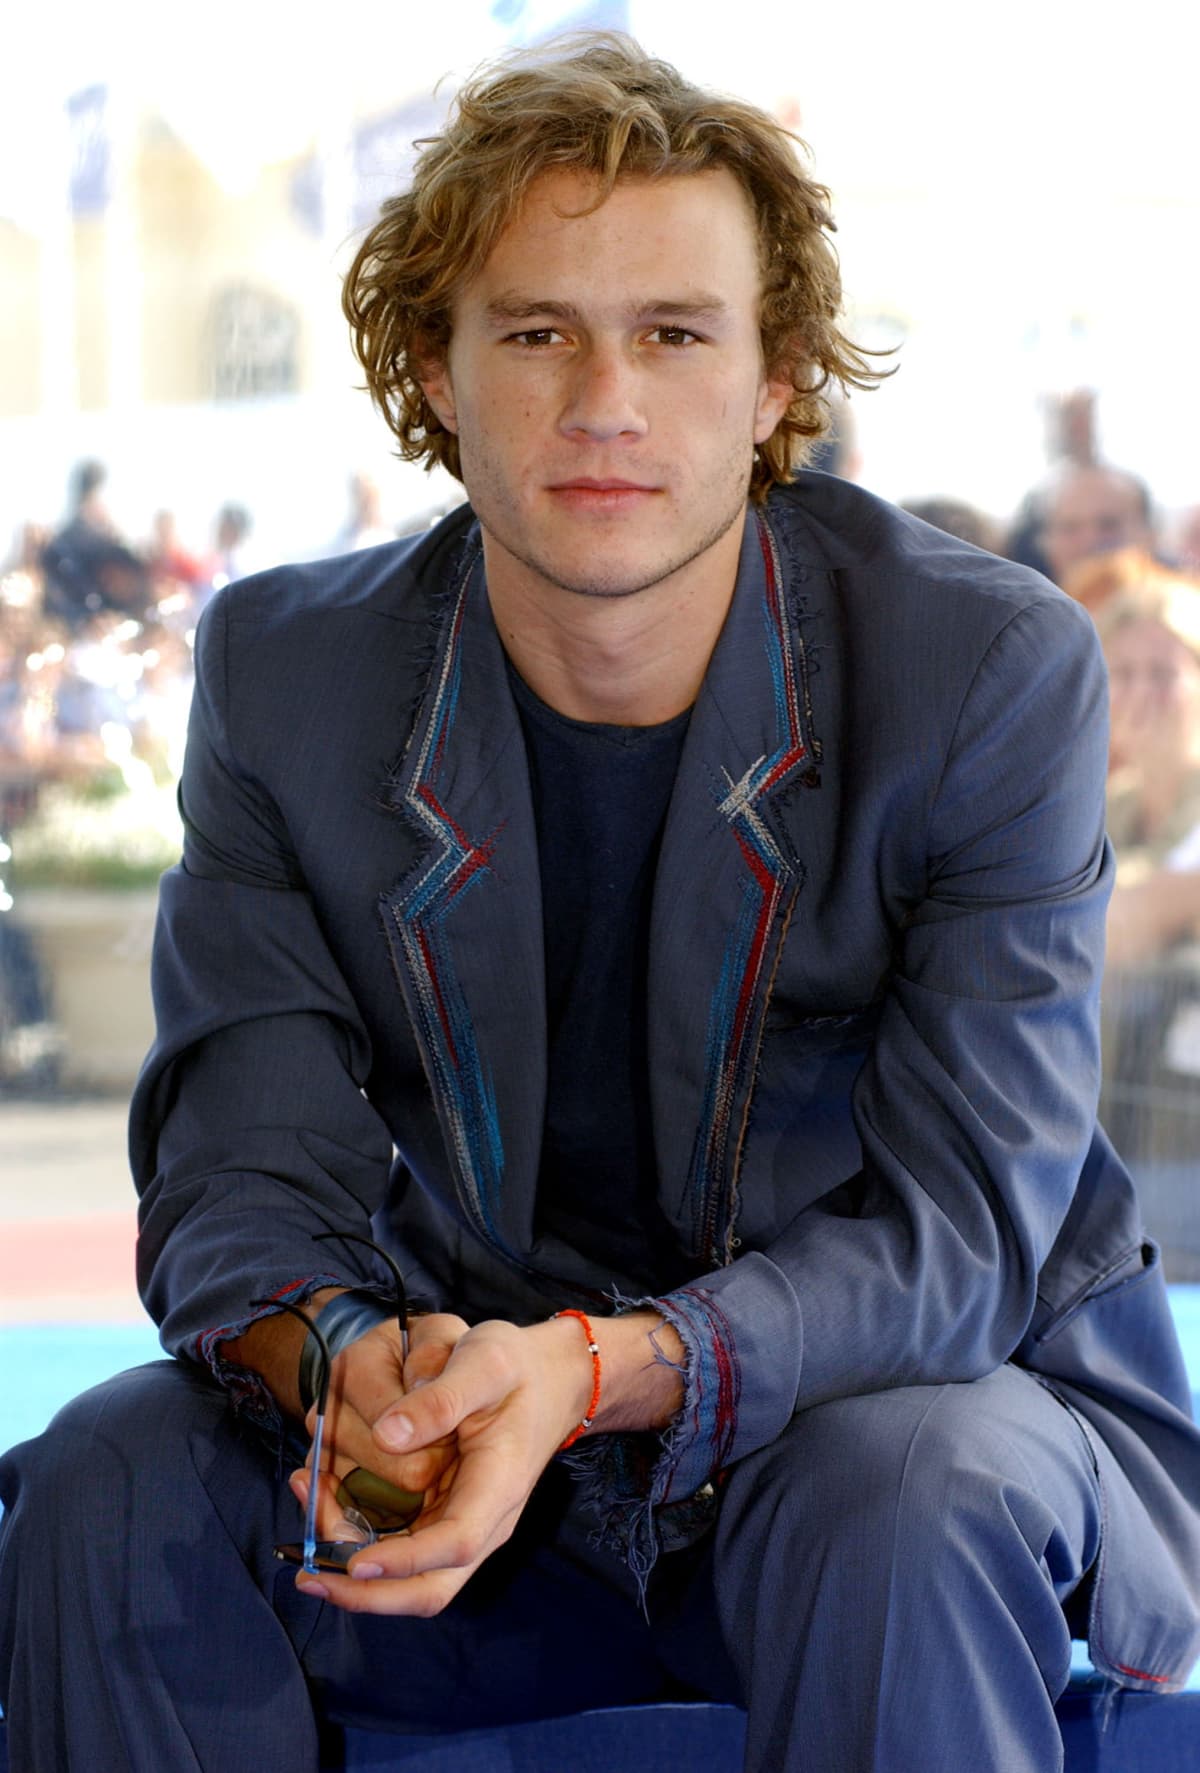 APRIL 2001 - RISING STAR FROM WESTERN AUSTRALIA, HEATH LEDGER, 21 YEARS OLD WAS IN SYDNEY FOR  PRESS CONFERENCE PROMOTING HIS LATEST MOVIE "A KNIGHT'S  TALE" AT  THE HYDE PARK BARRACKS, QUEENS SQUARE, SYDNEY, AUSTRALIA.